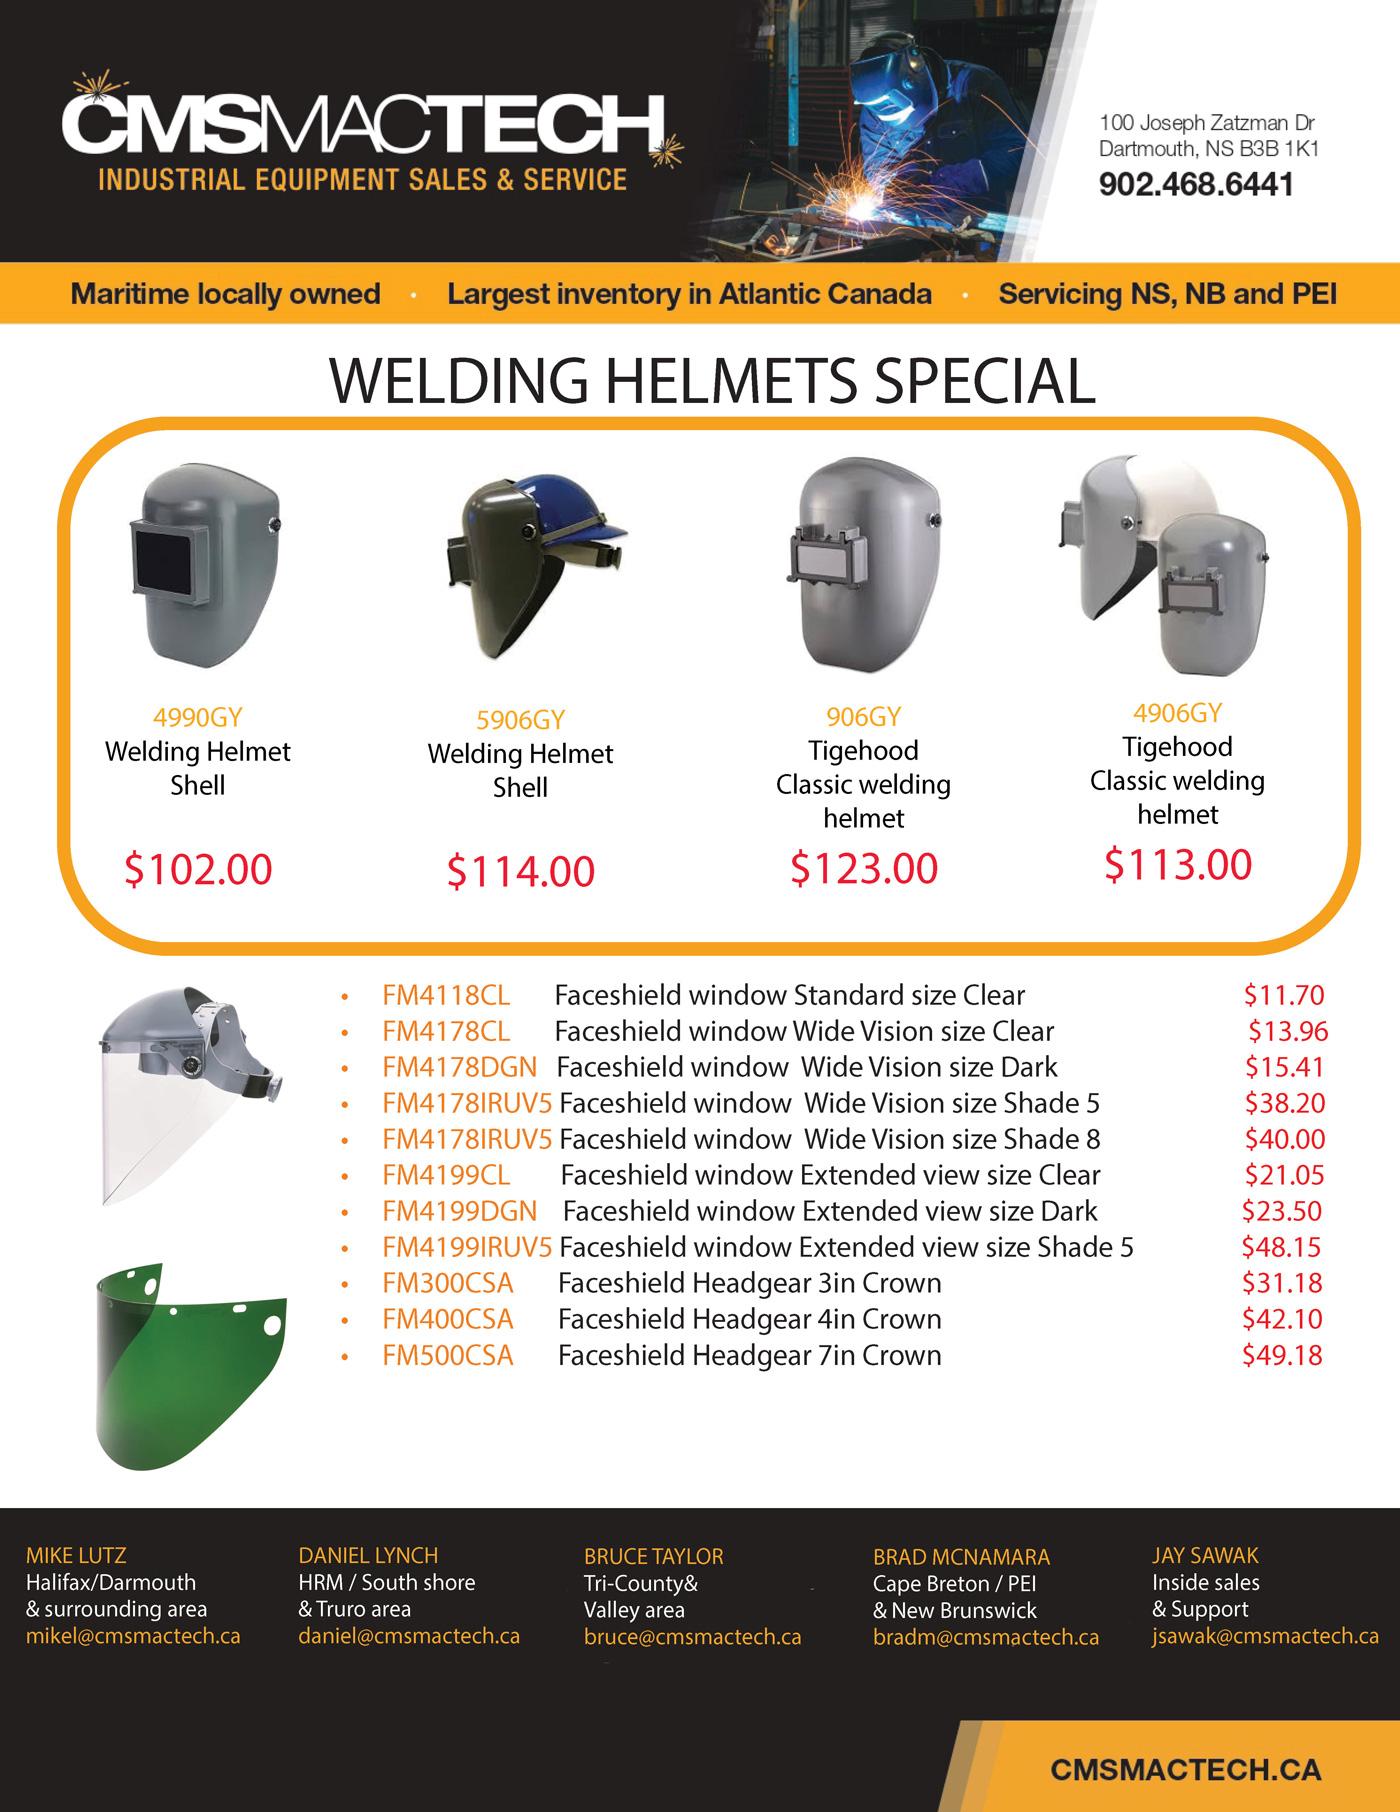 Special pricing on welding helmets and face shields